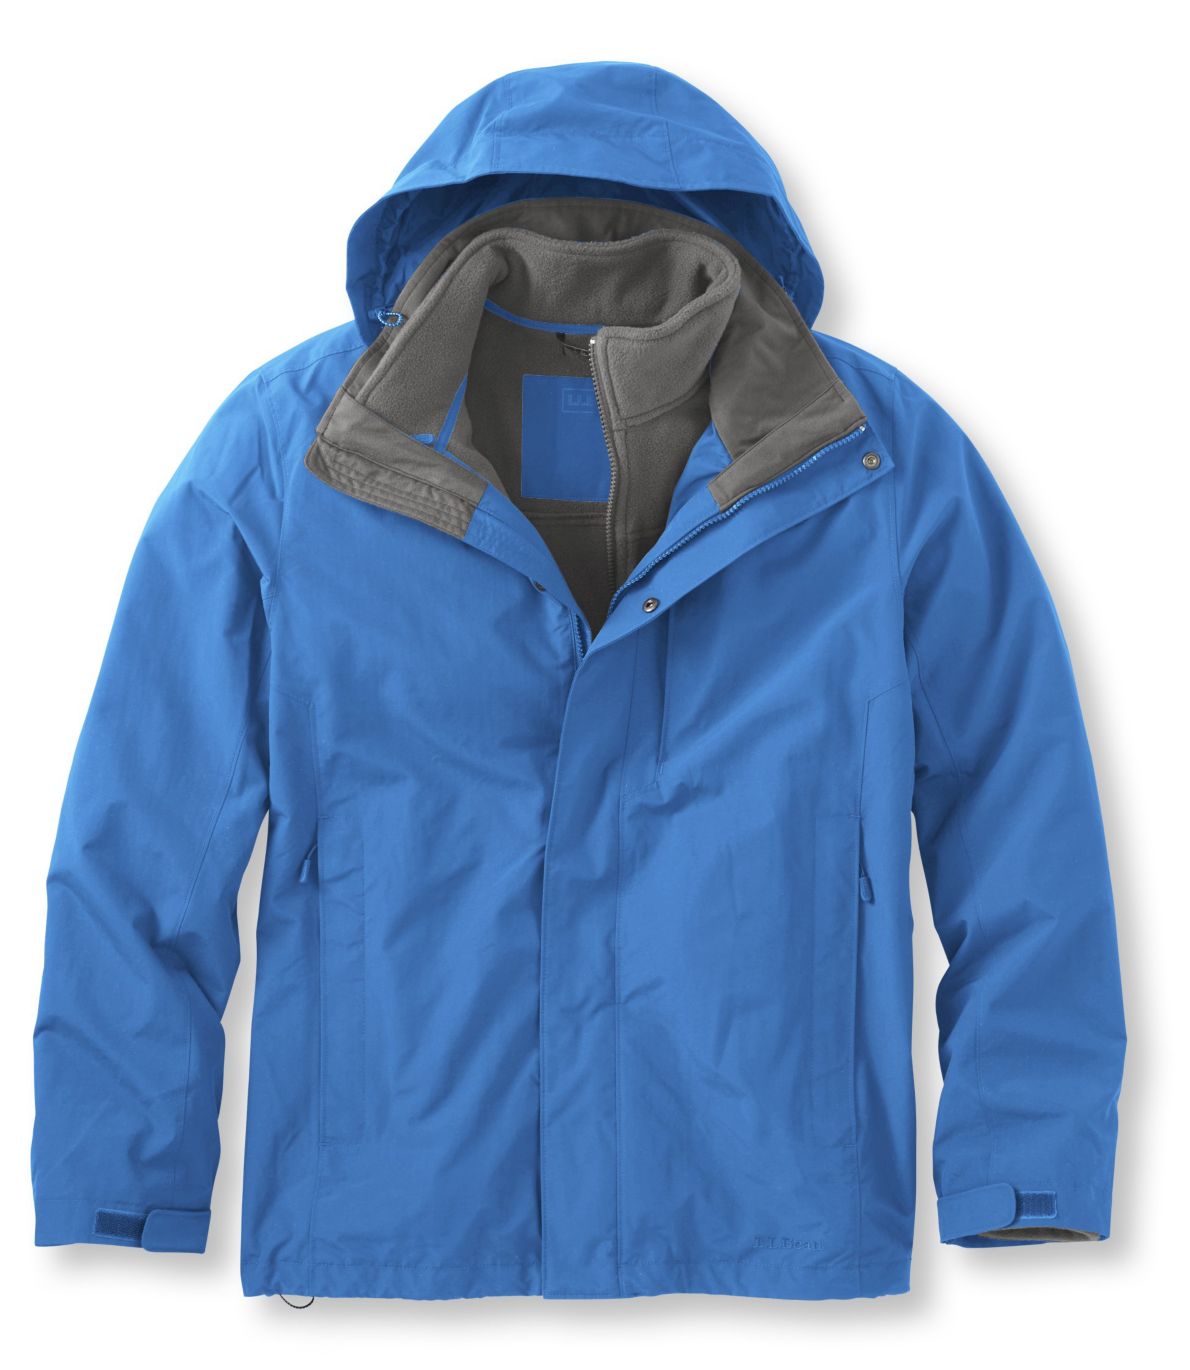 Storm Chaser 3-in-1 Jacket at L.L. Bean